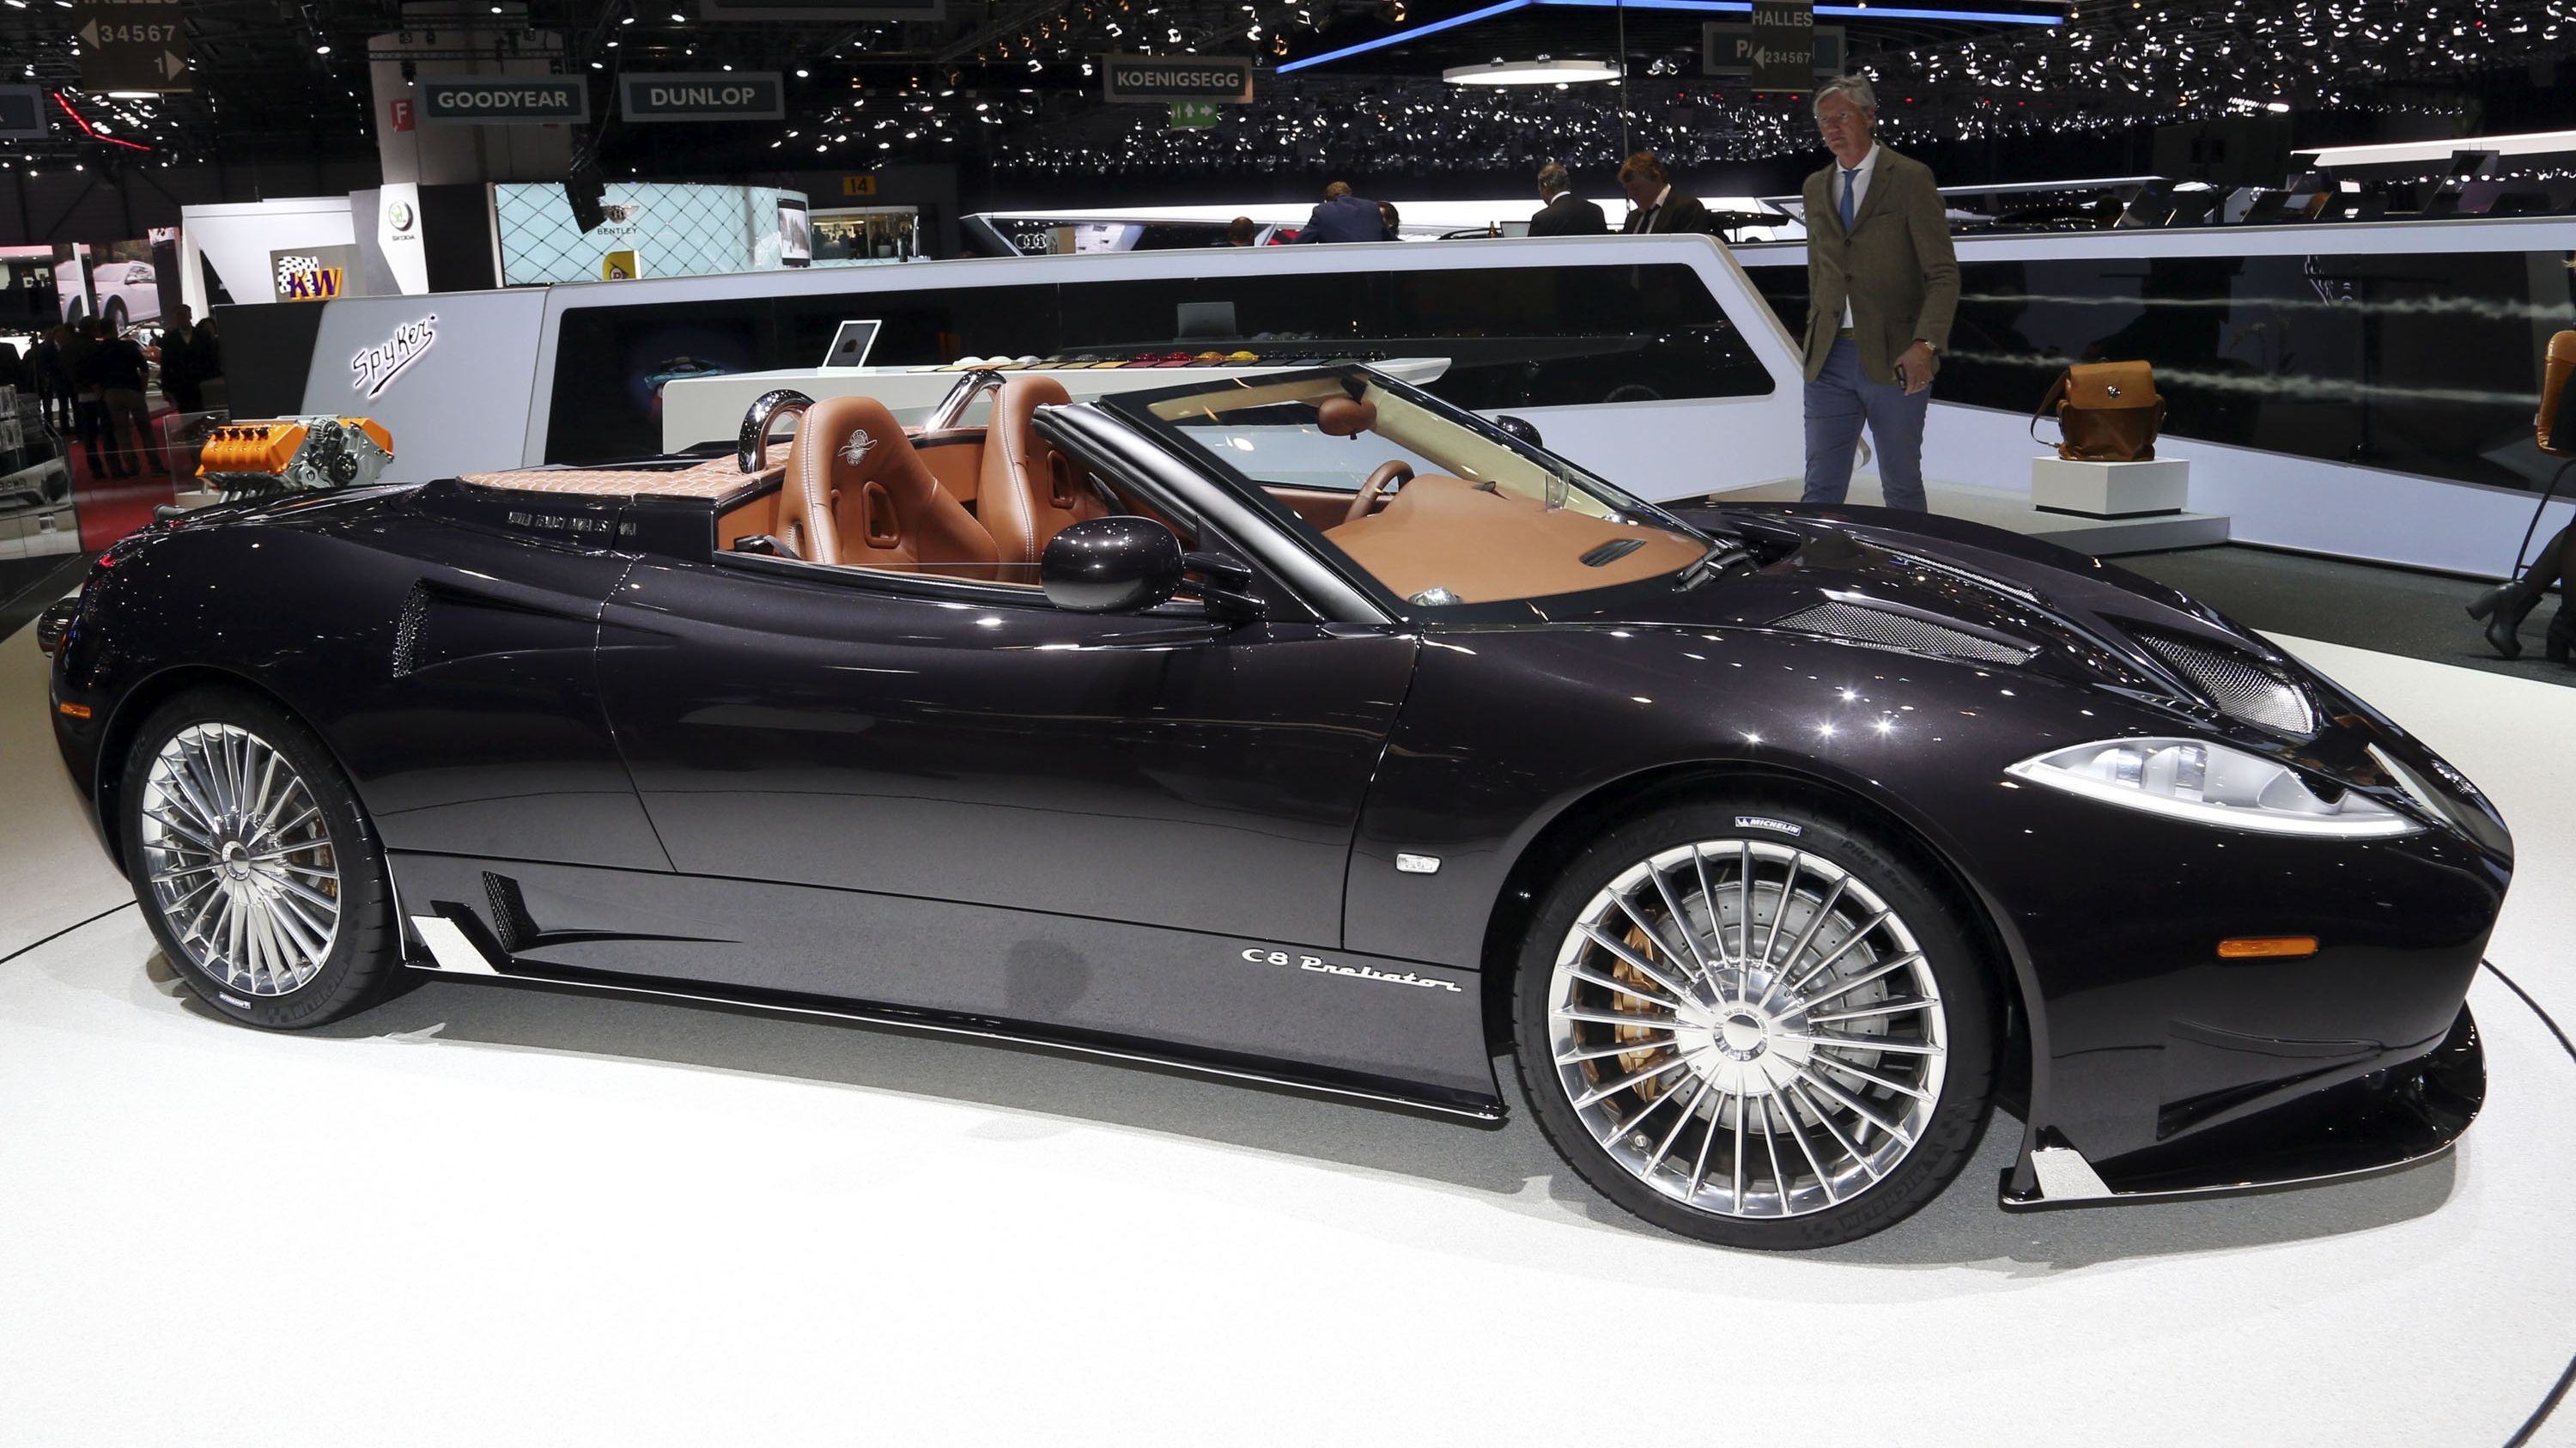 The Spyker-Koenigsegg Collaboration Could Change The Supercar Landscape For The Better